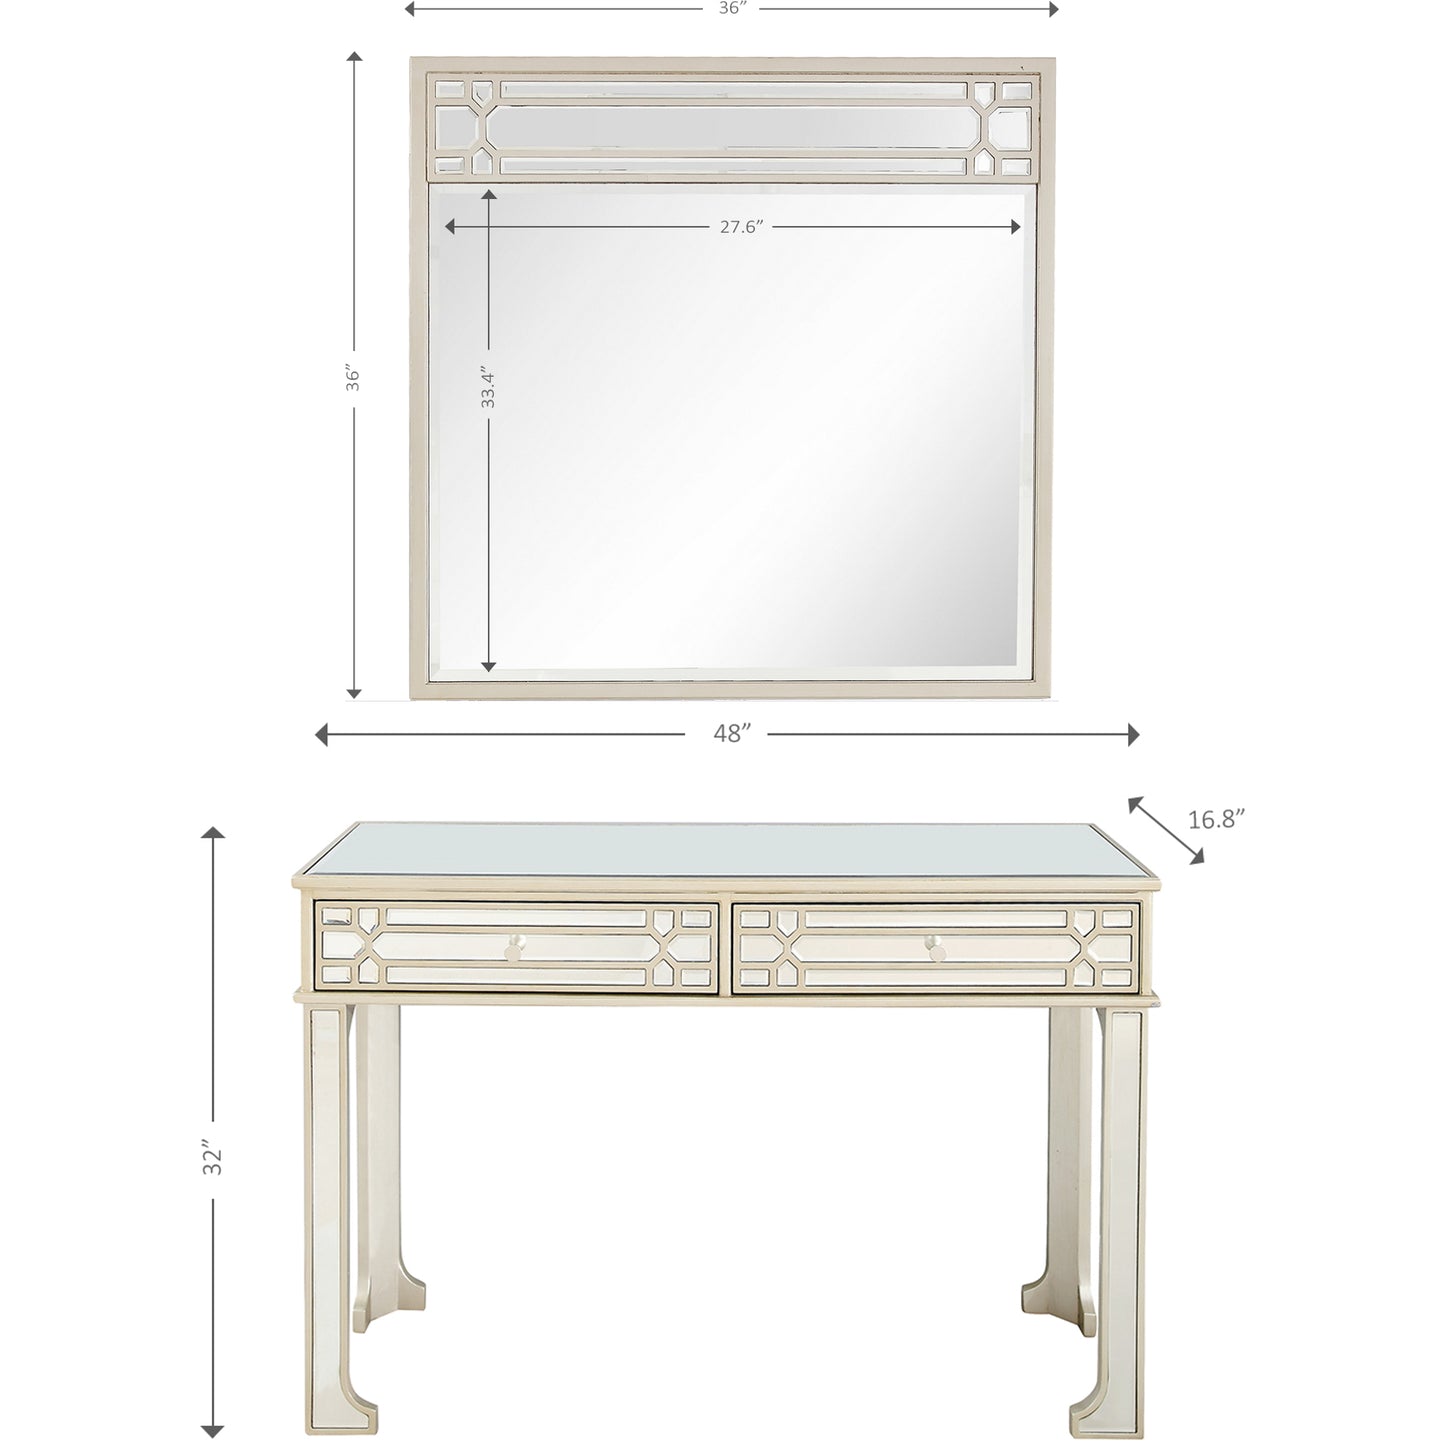 Aubrey Wall Mirror and Console